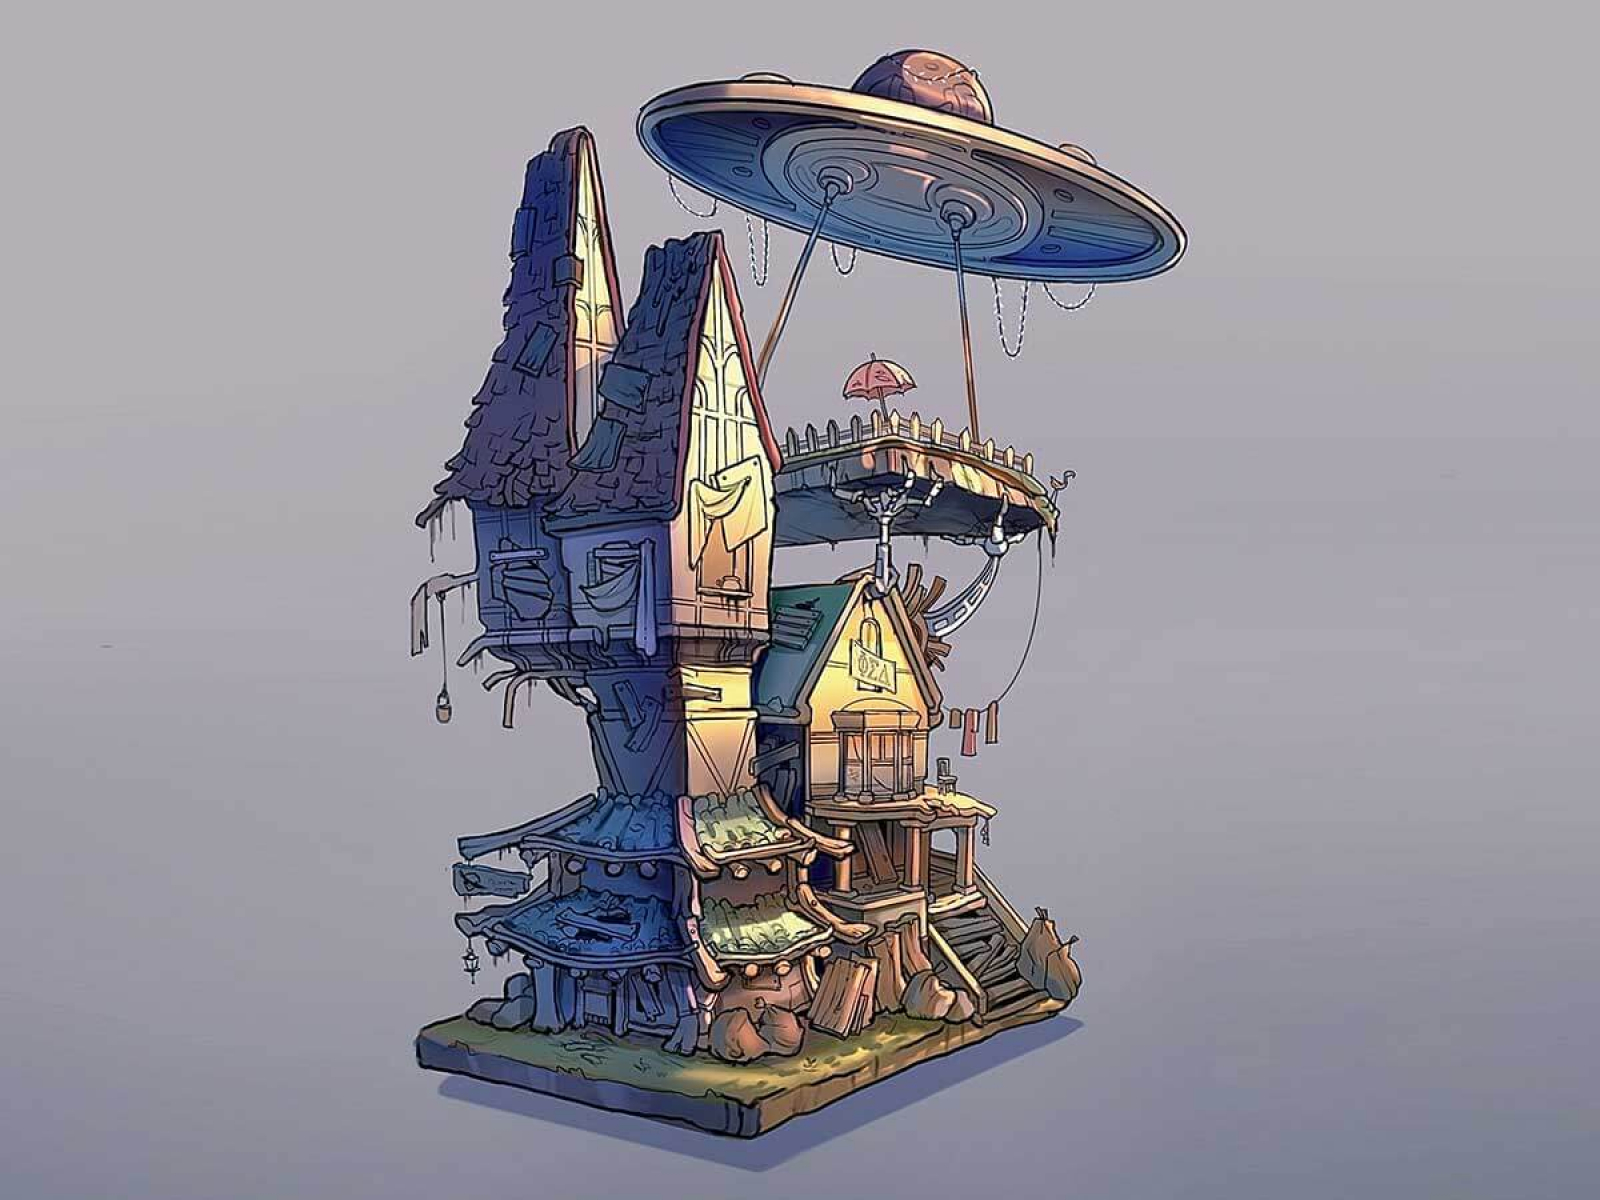 A house with various add-ons and a UFO at the top.